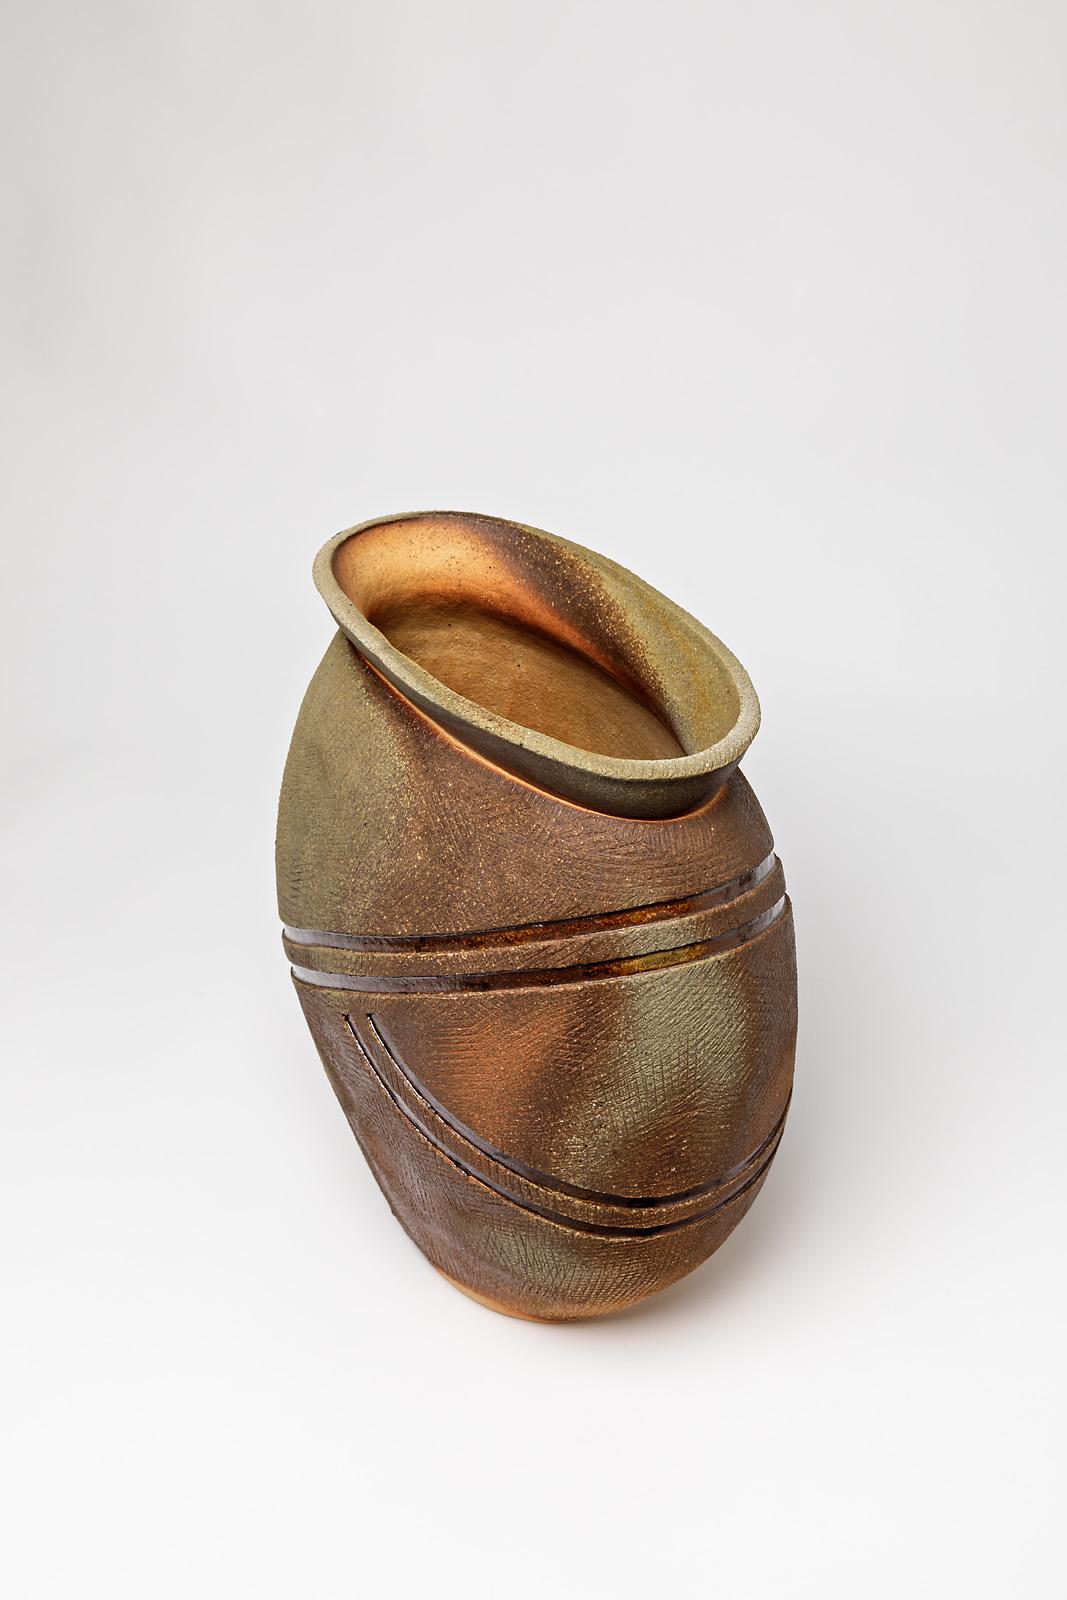 20th Century Ceramic Vase by Guieba, Signed, 1980-1990 For Sale